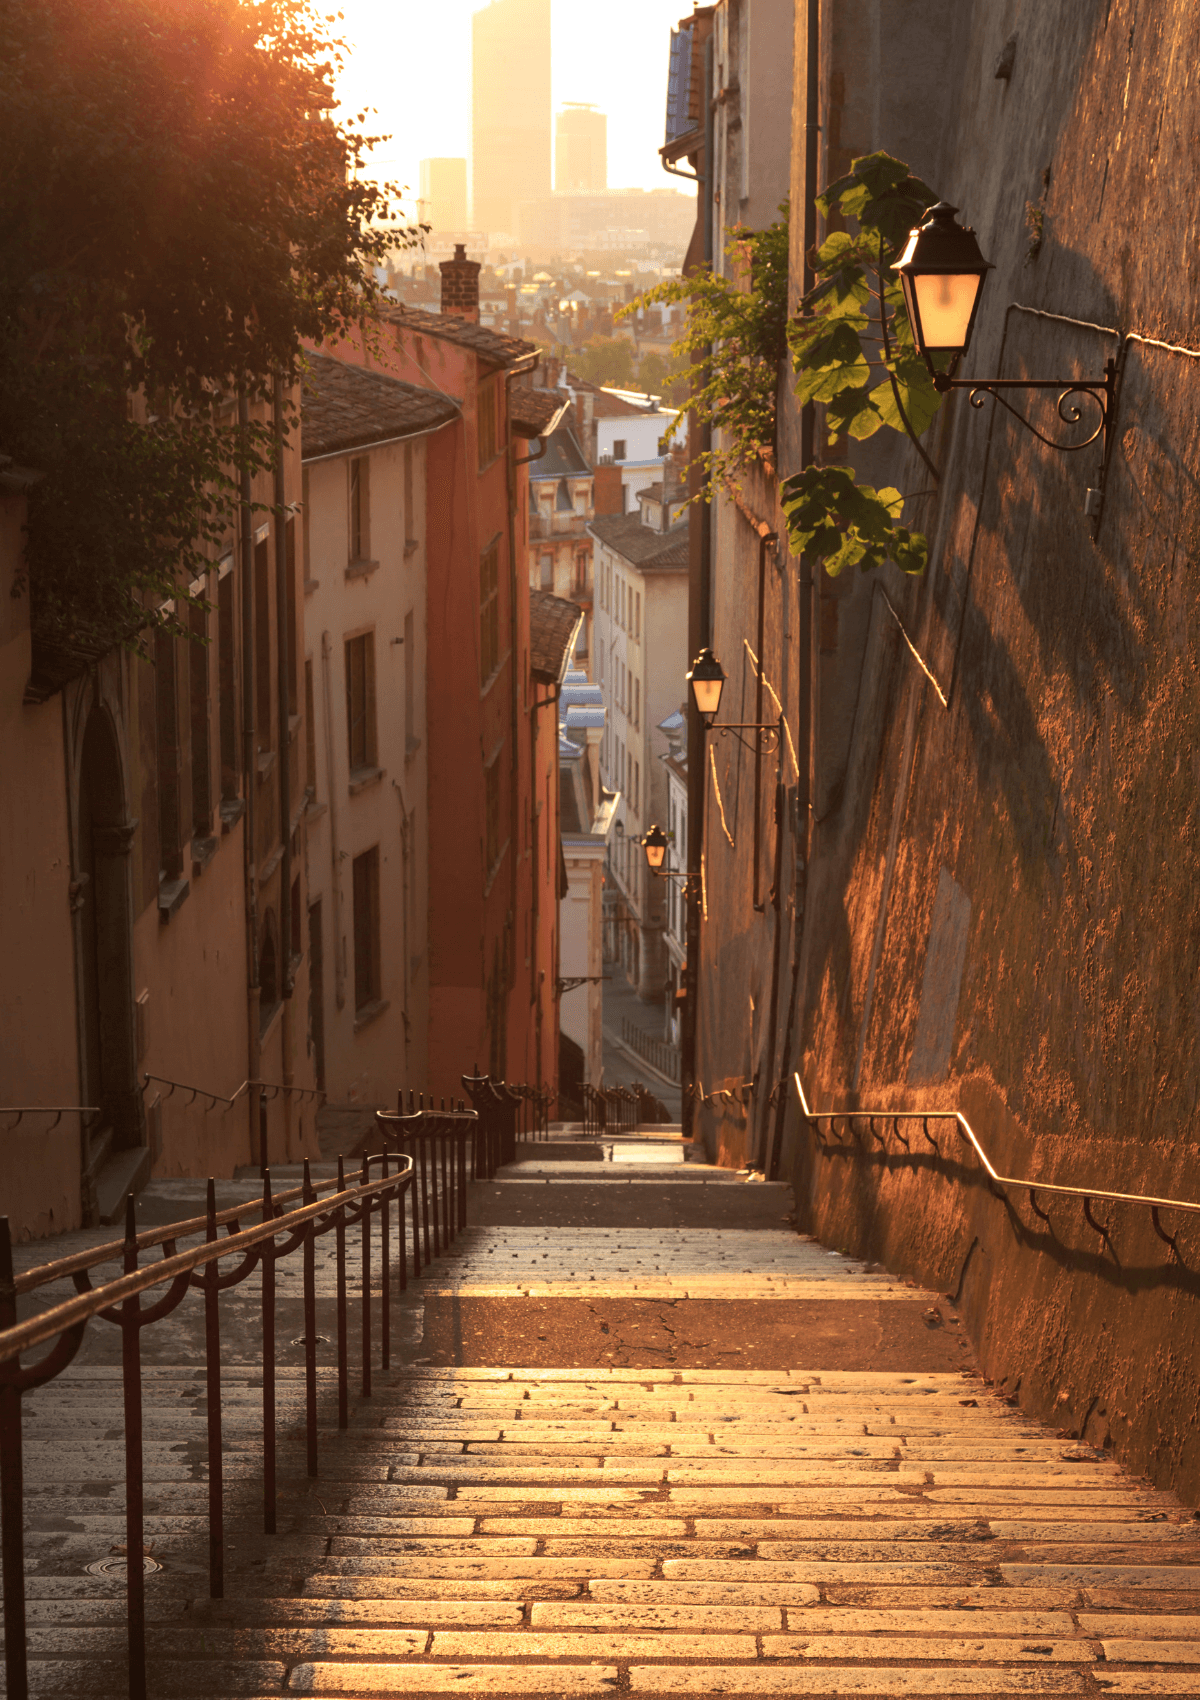 sunrise views of the old town in Vieux Lyon France